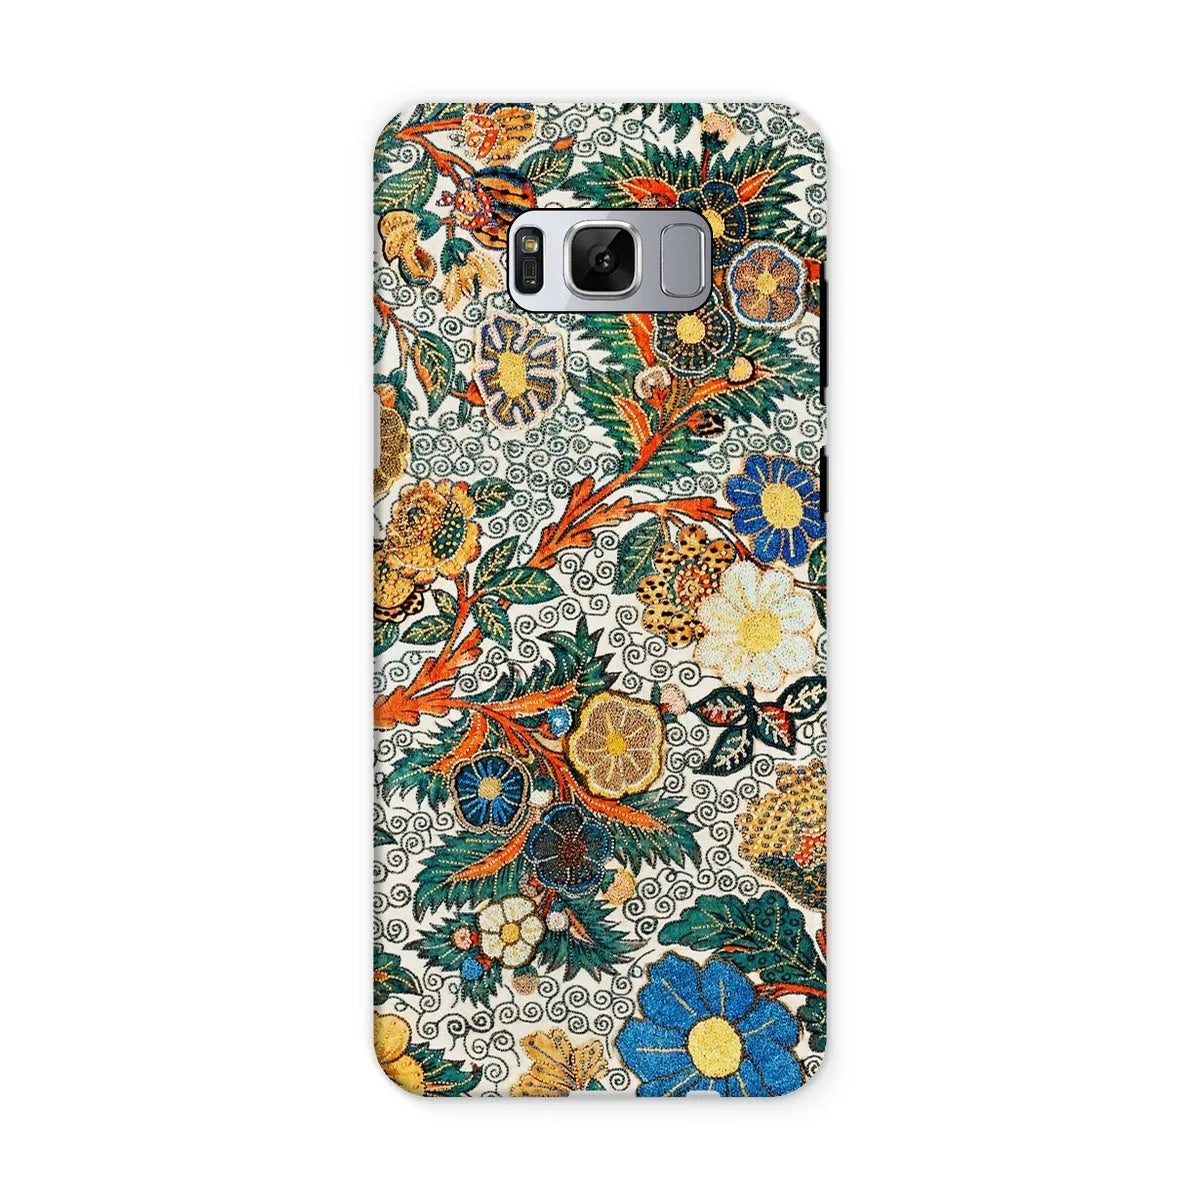 Blossomewhere Japanese Tapestry Art Phone Case - Samsung Galaxy S8 / Matte - Mobile Phone Cases - Aesthetic Art